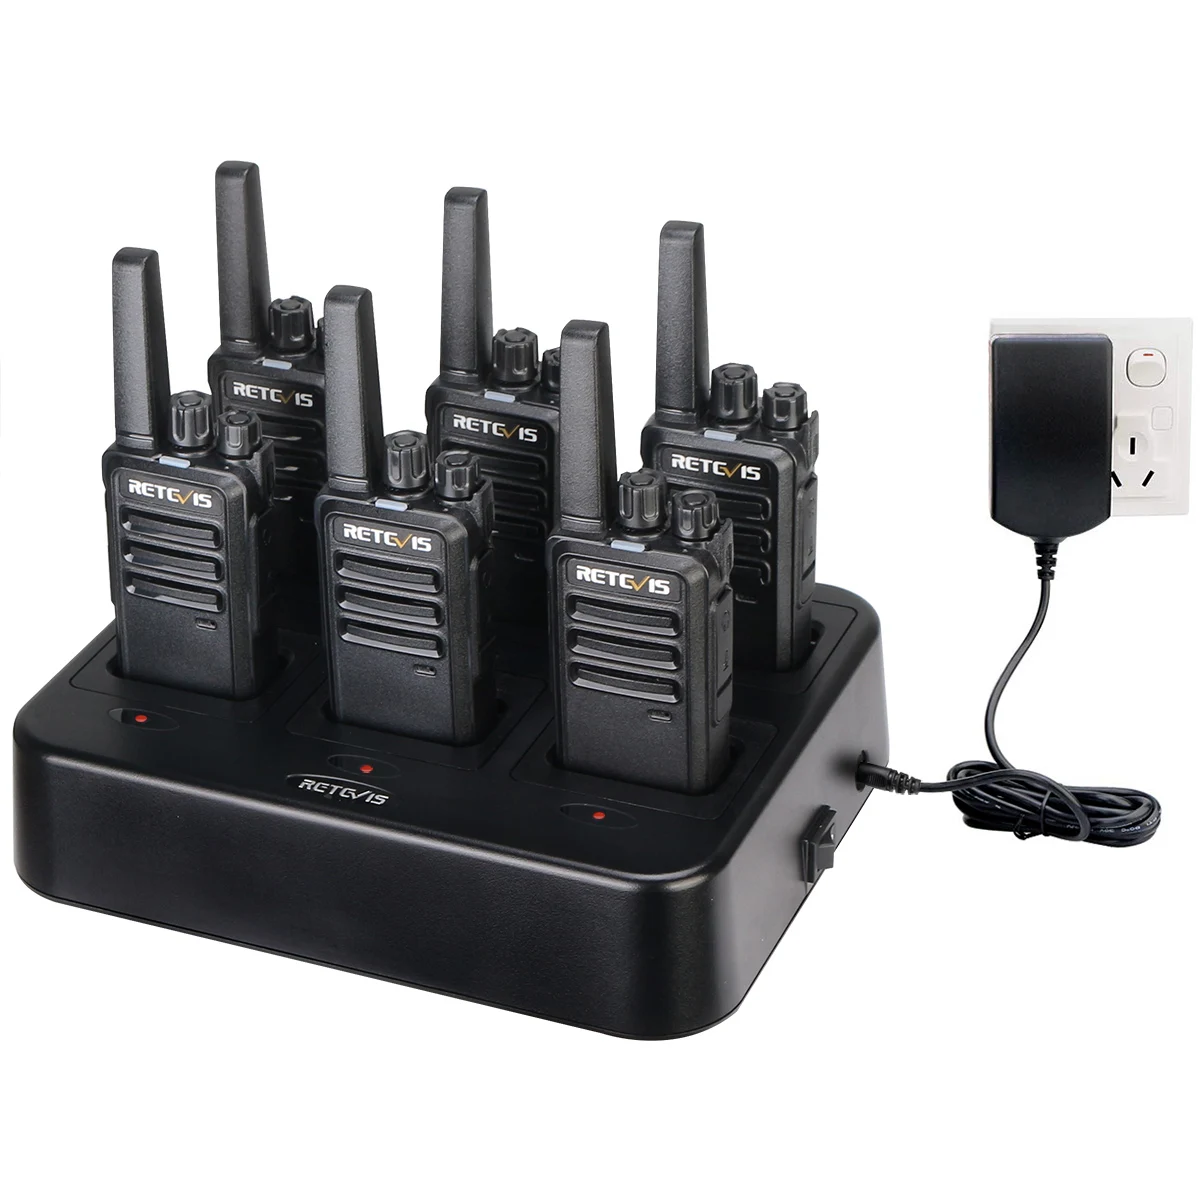 

6Pack Retevis RT68 walkie talkie with muti rapid charger 2W FRS 16CH handheld two way radio set with GANG dock charger